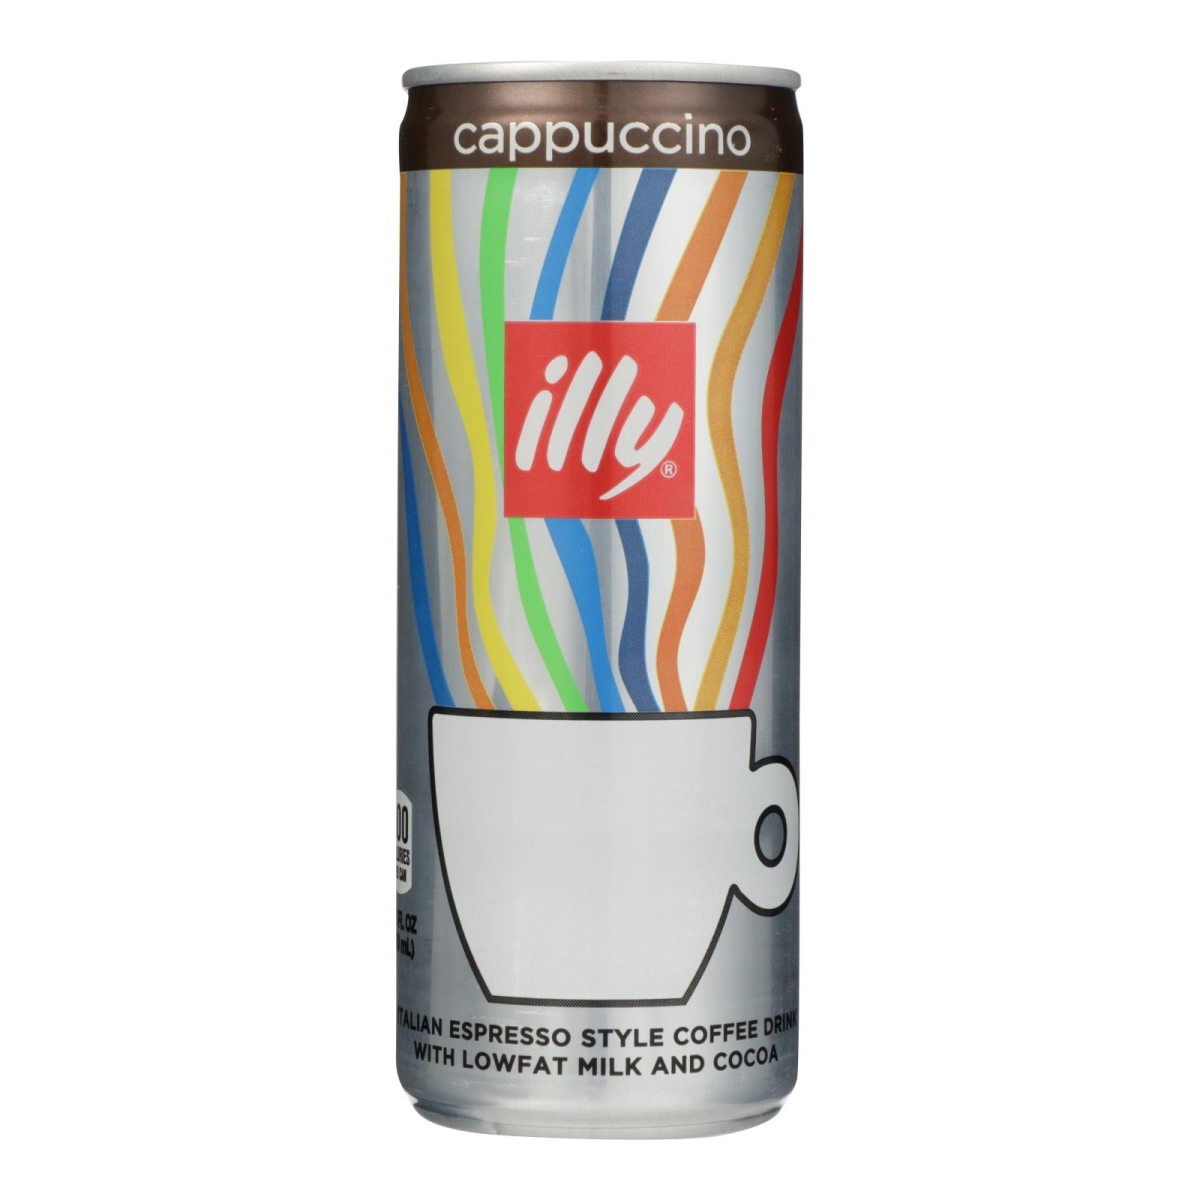 Illy Caffe Coffee 2445070 8.45 Fl Oz Cappuccino Coffee Drink, Case Of 12